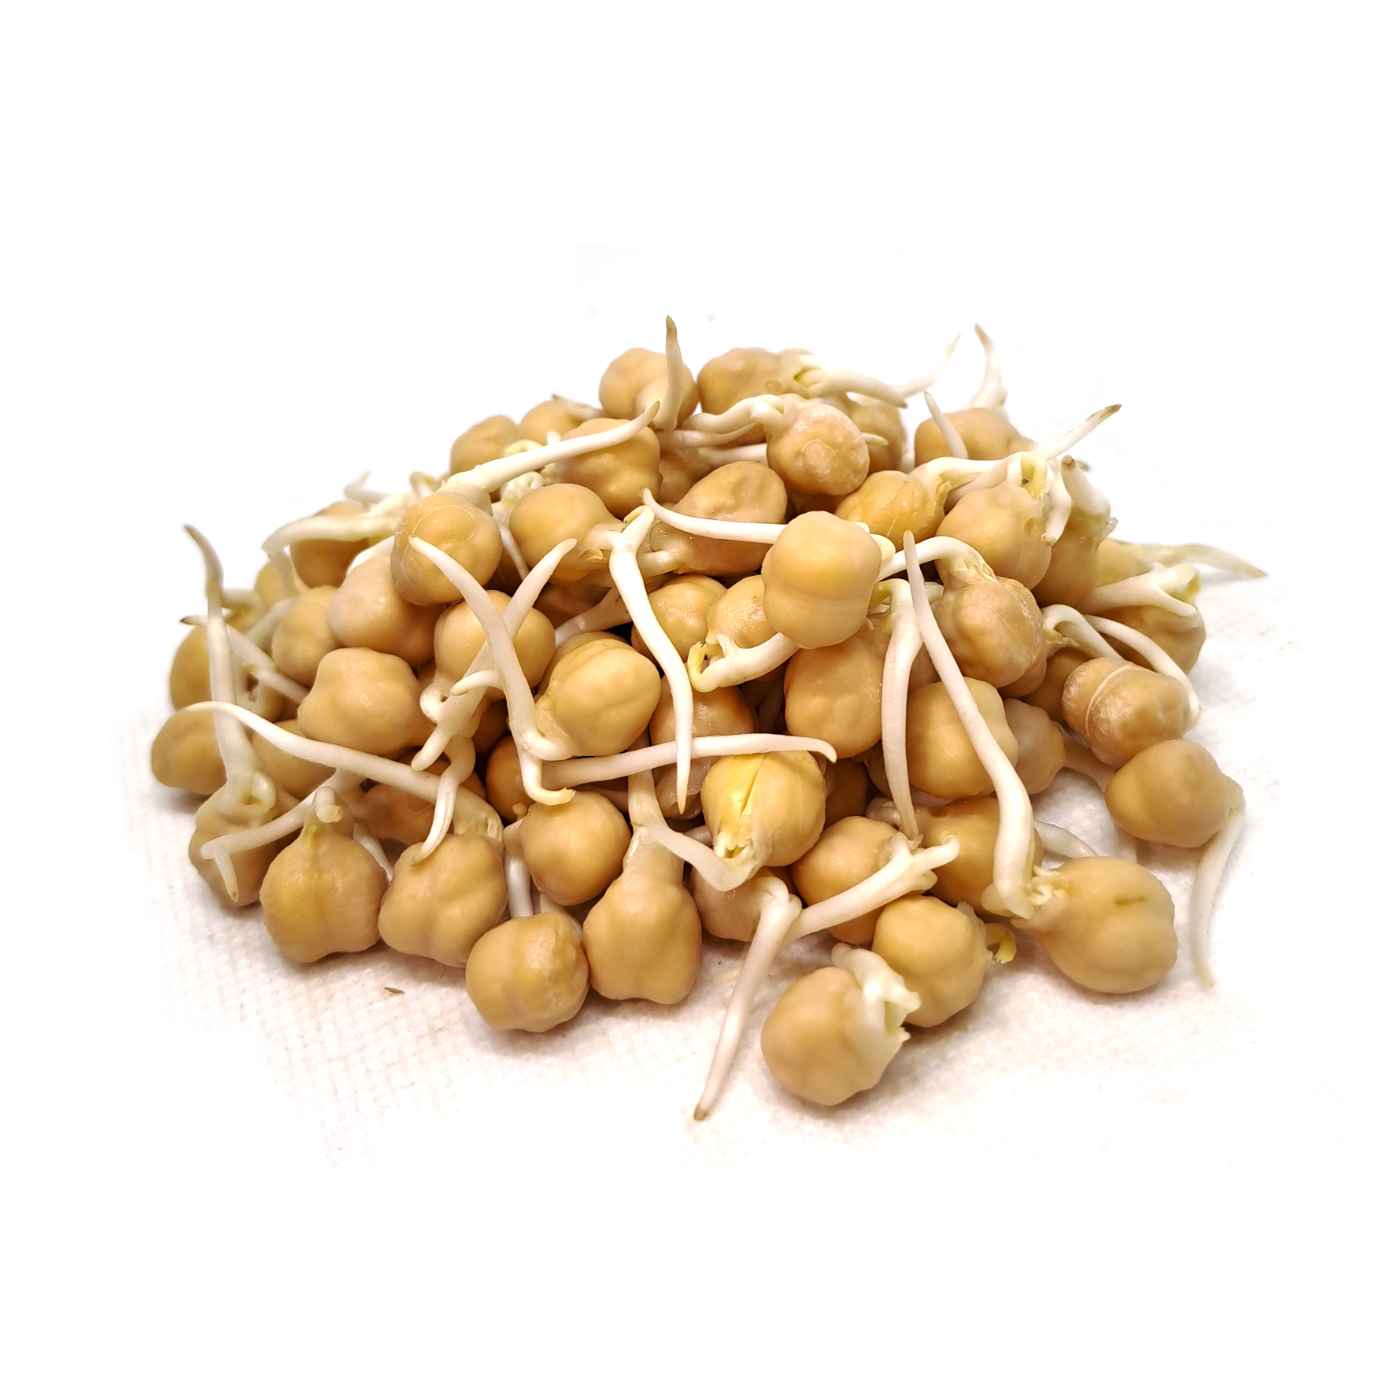 Organic chickpea sprouts